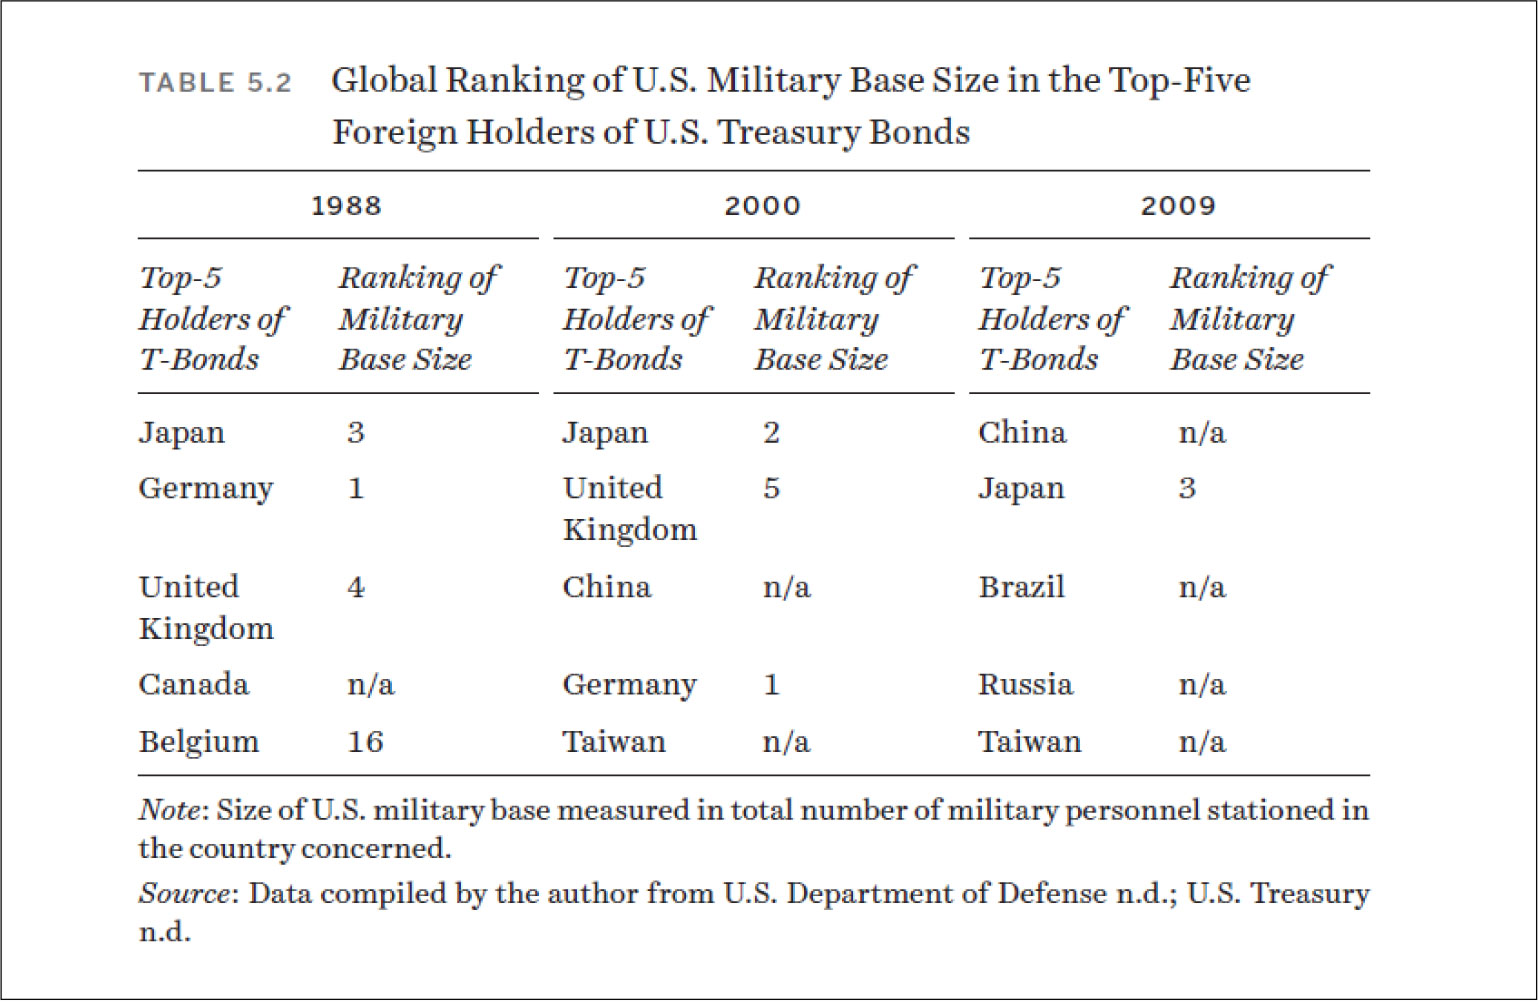 Global Ranking of U.S. Military Base Size in the Top-Five Foreign Holders of U.S. Treasury Bonds